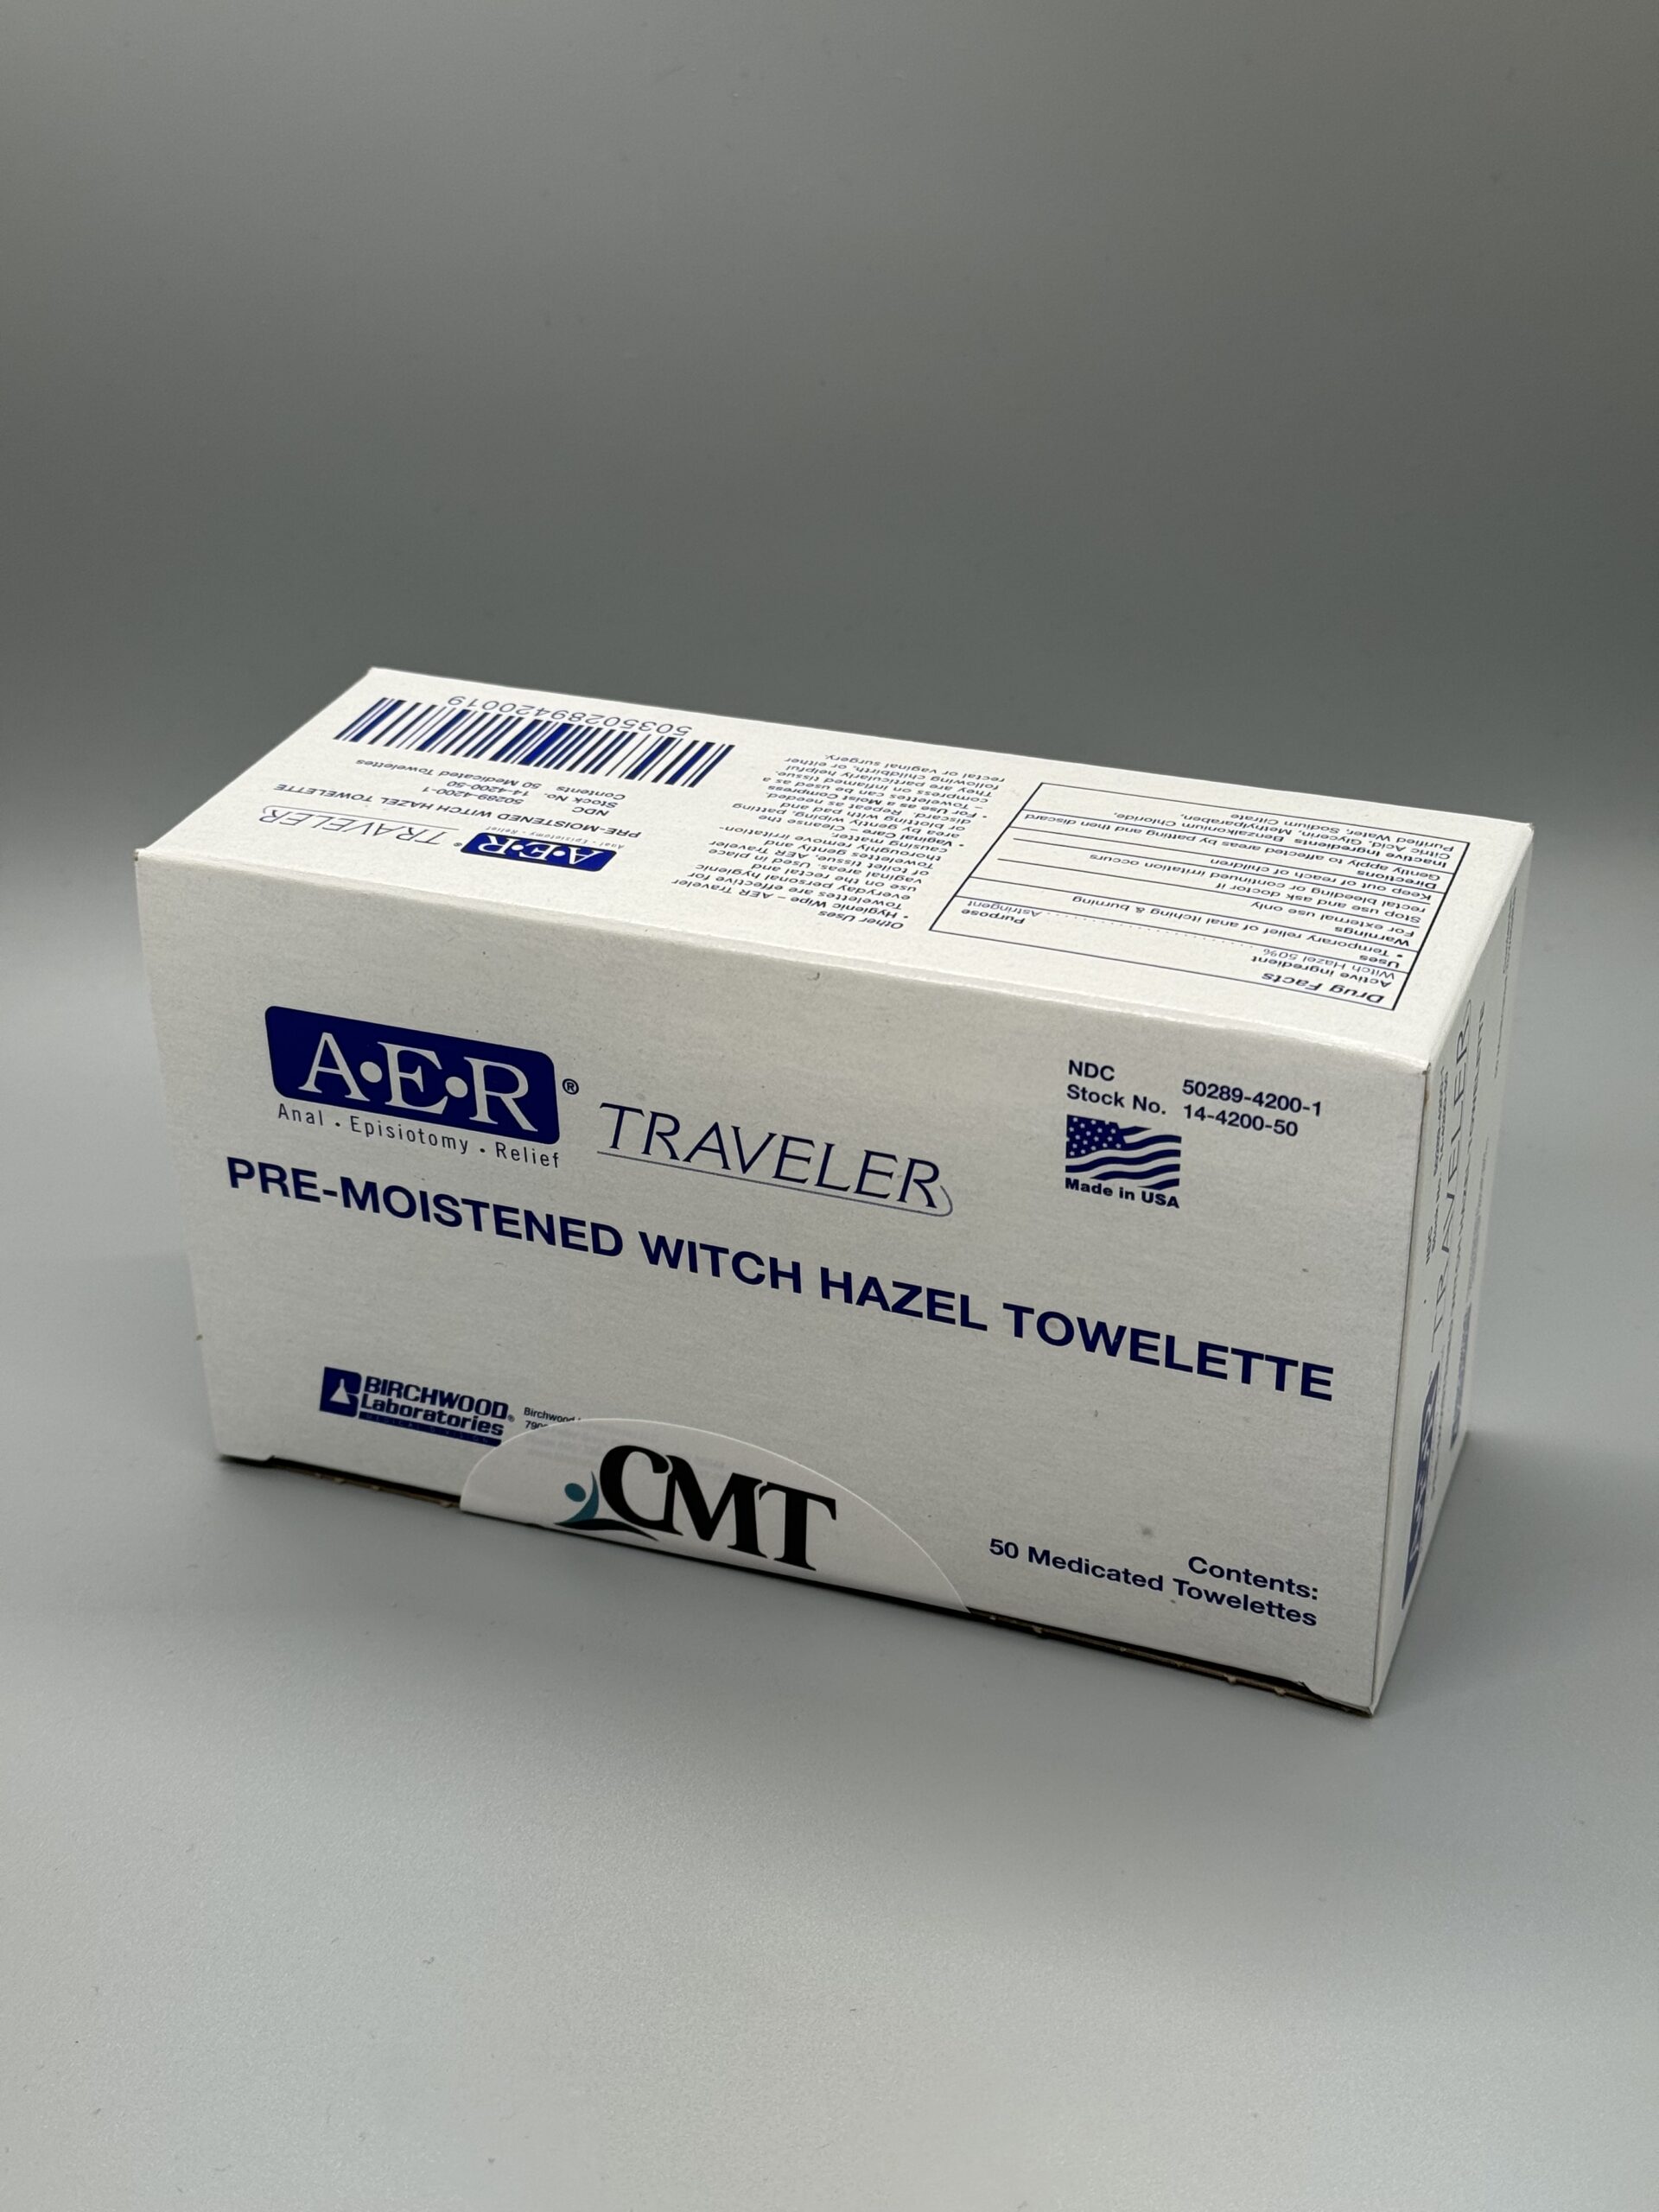 B-SURE Pre-moistened Witch Hazel Towelettes - CMT Medical